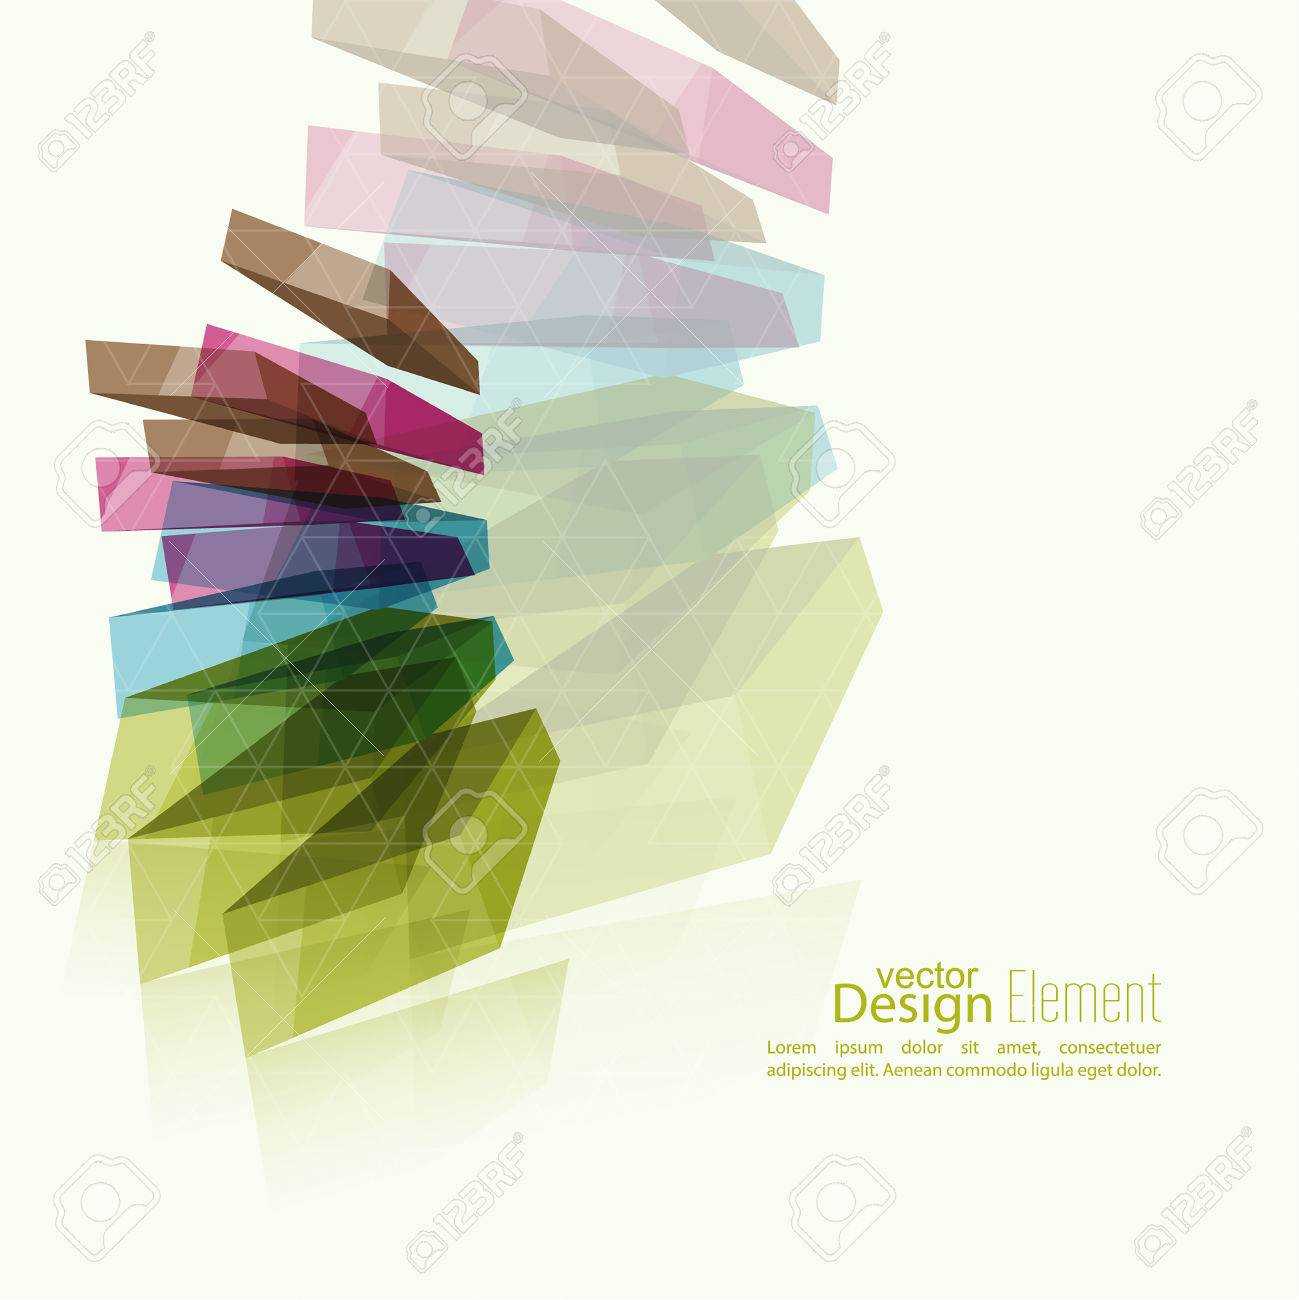 Abstract Background With Colored Crystals, Trellis Structure. For Cover  Book, Brochure, Flyer, Poster, Magazine, Booklet, Leaflet, Cd Cover Design, Inside Mobile Book Report Template